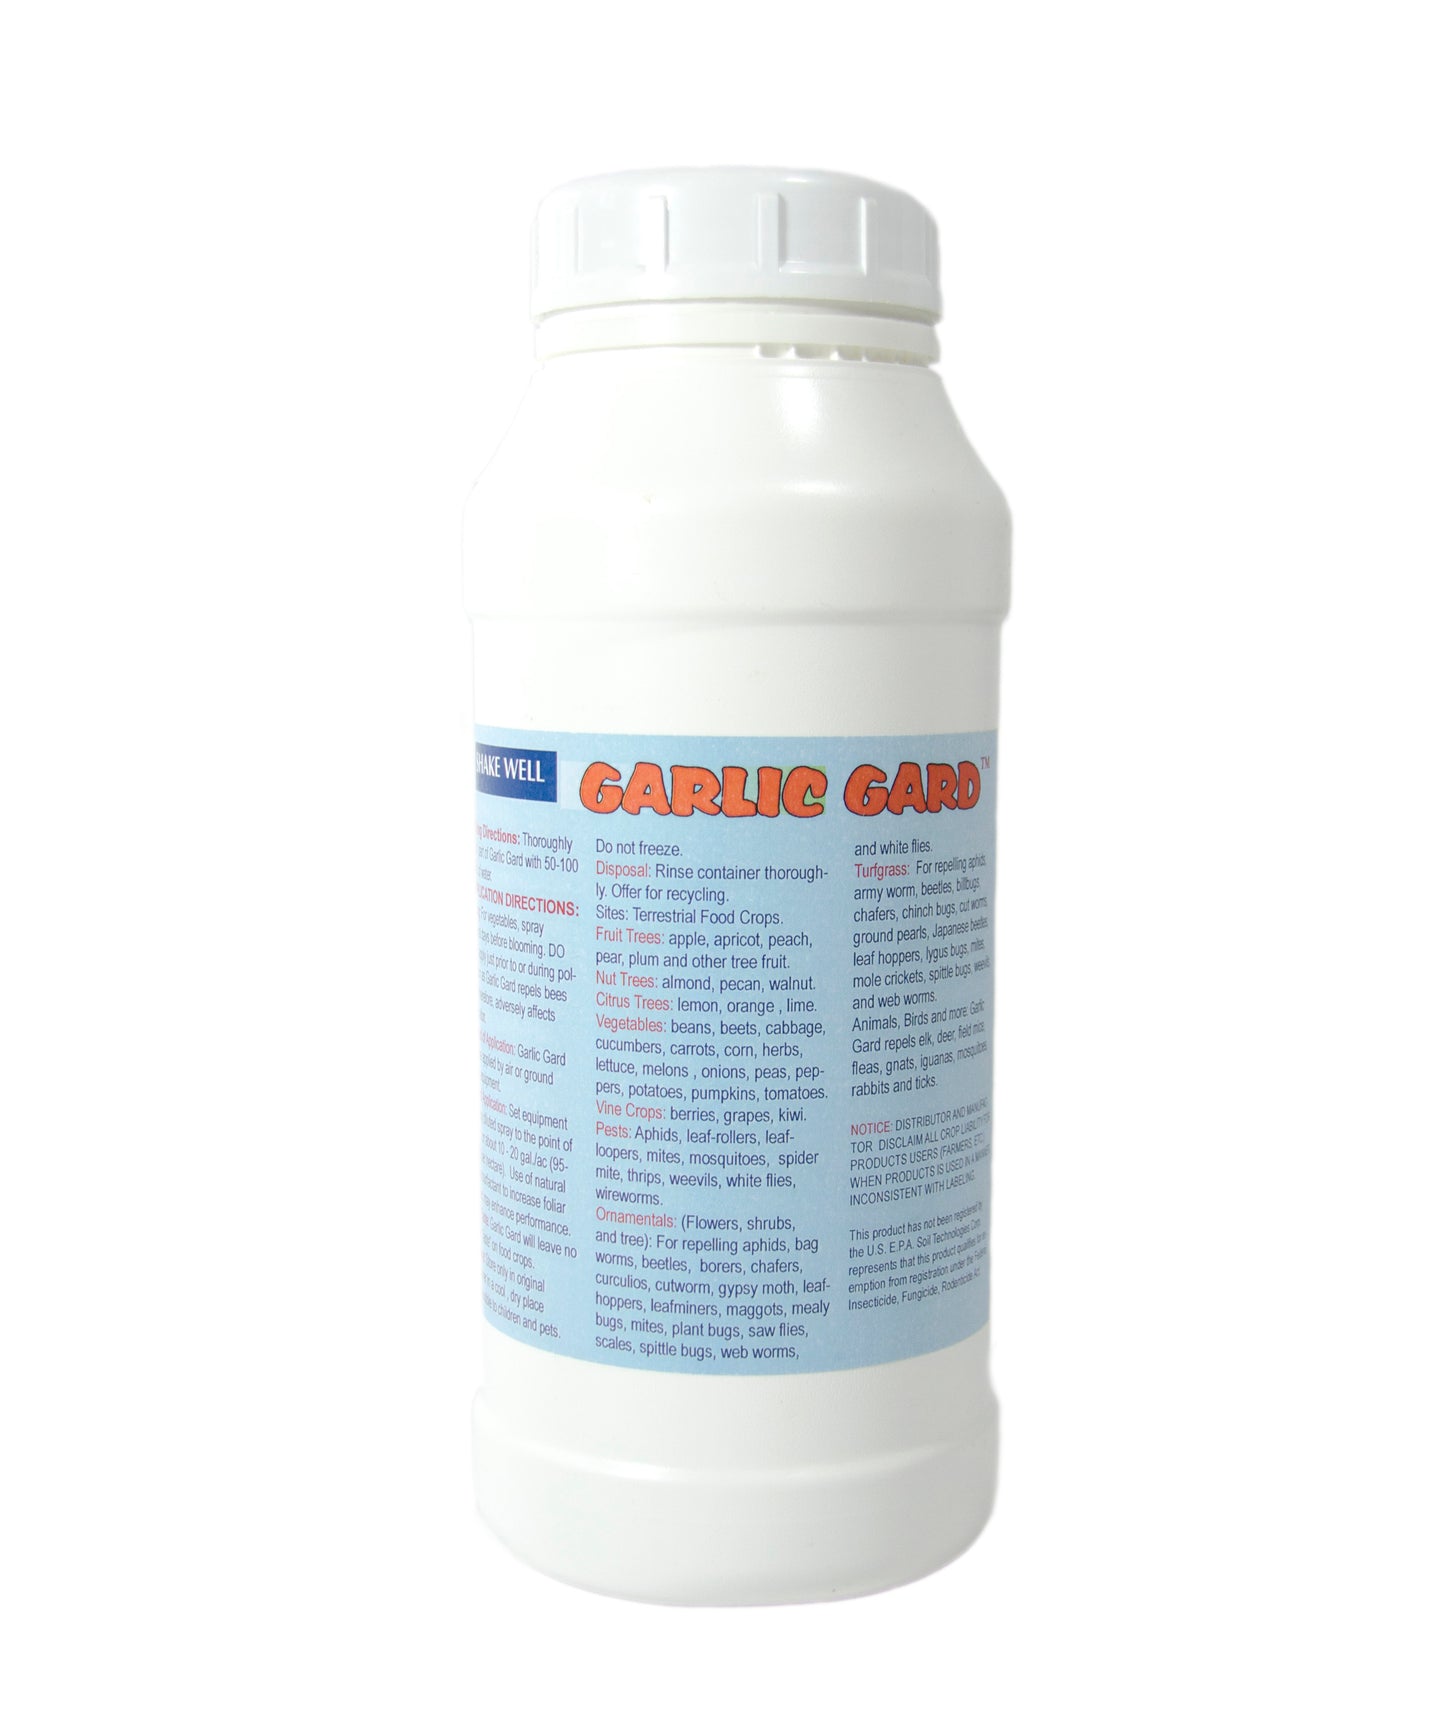 Back label of Garlic Gard. A garlic based formula made by Soil Technologies Corp.  Can be used to control and repel various pests. 